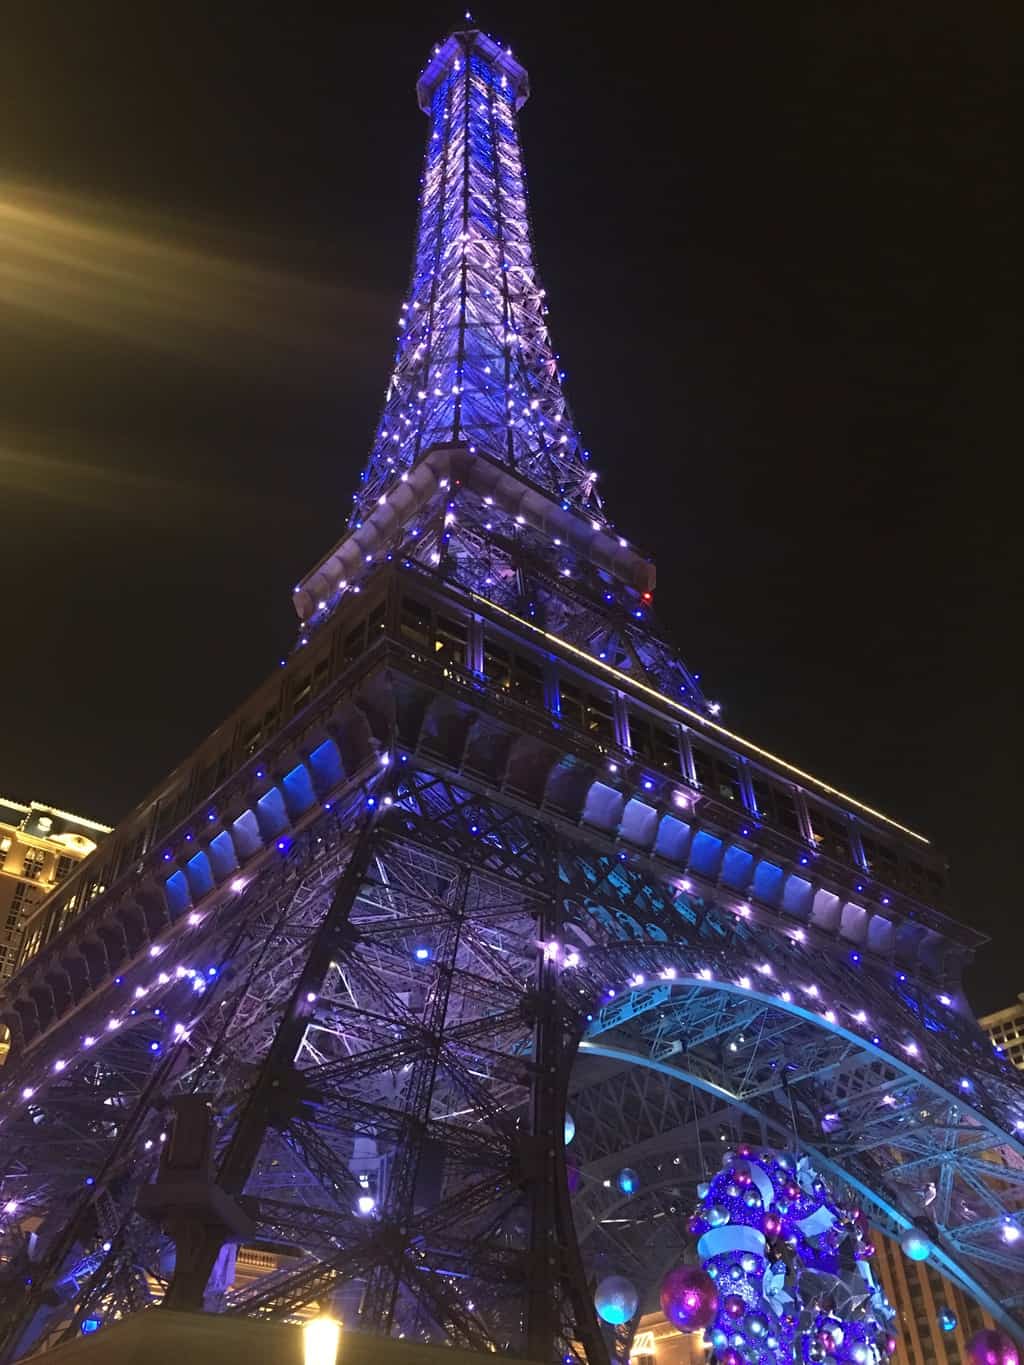 Night Shot of the Eiffel tower replica in The Parisian Macao